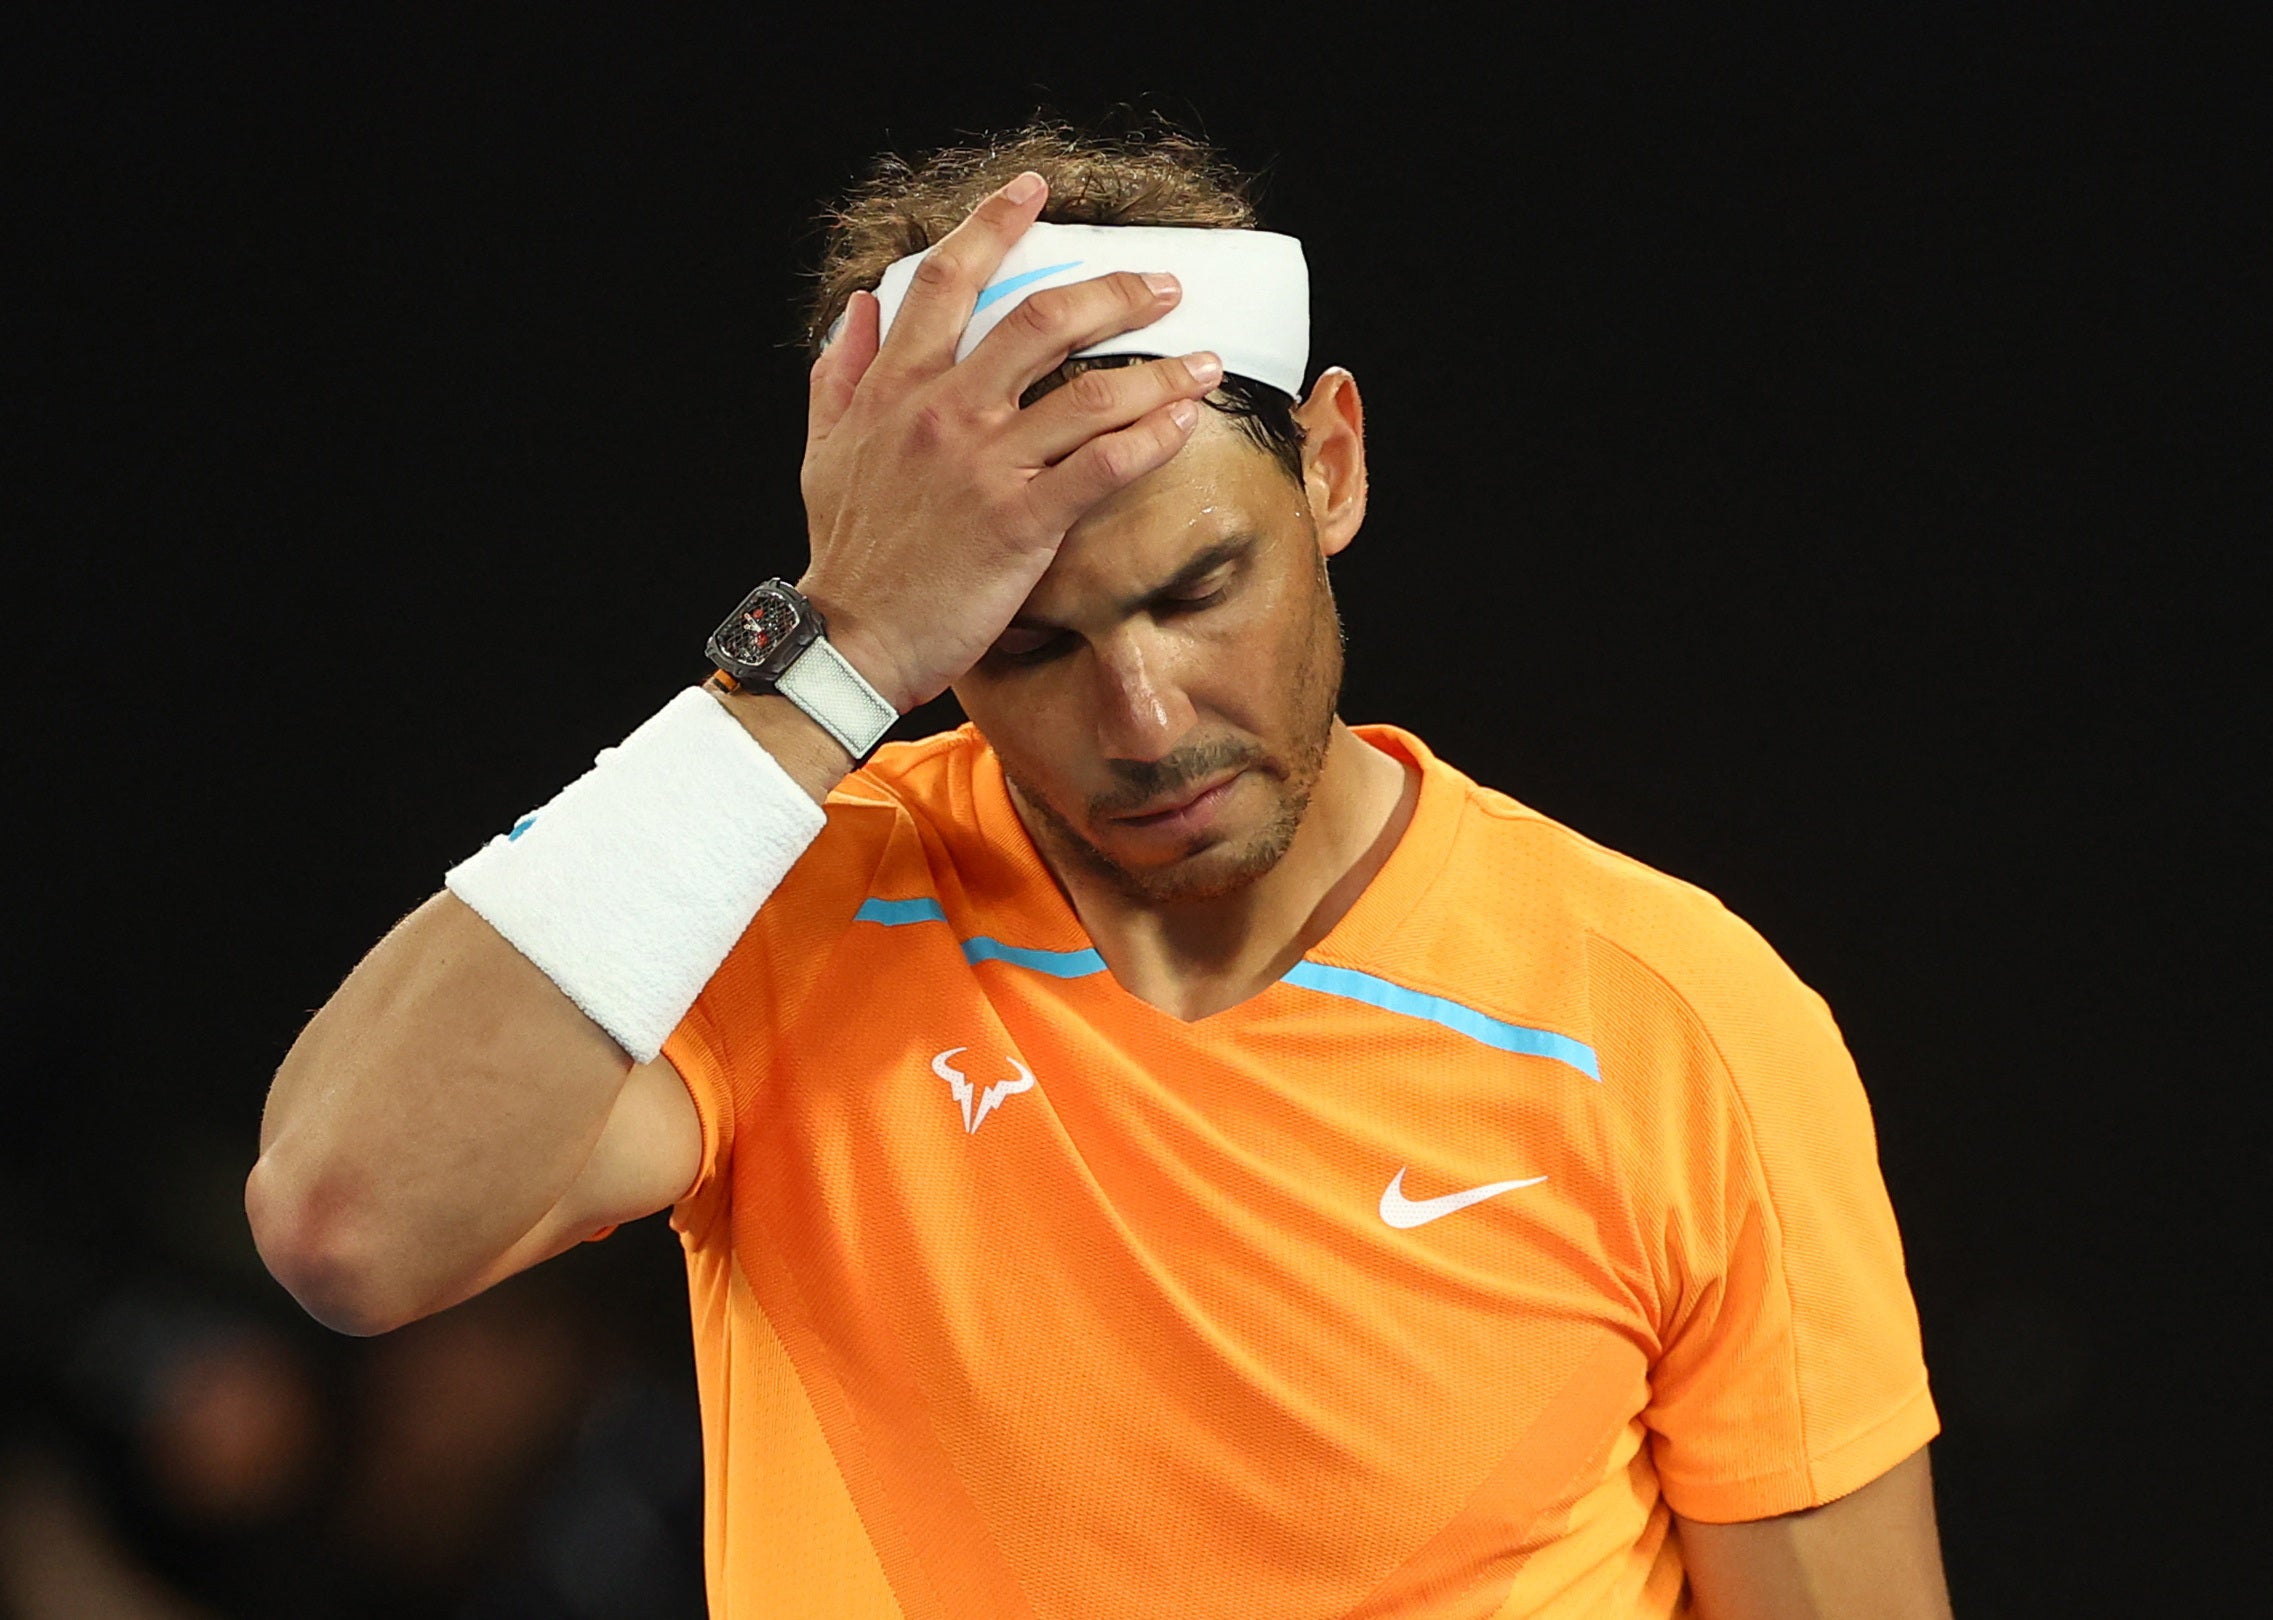 Rafael Nadal struggles with an injury during his second round match